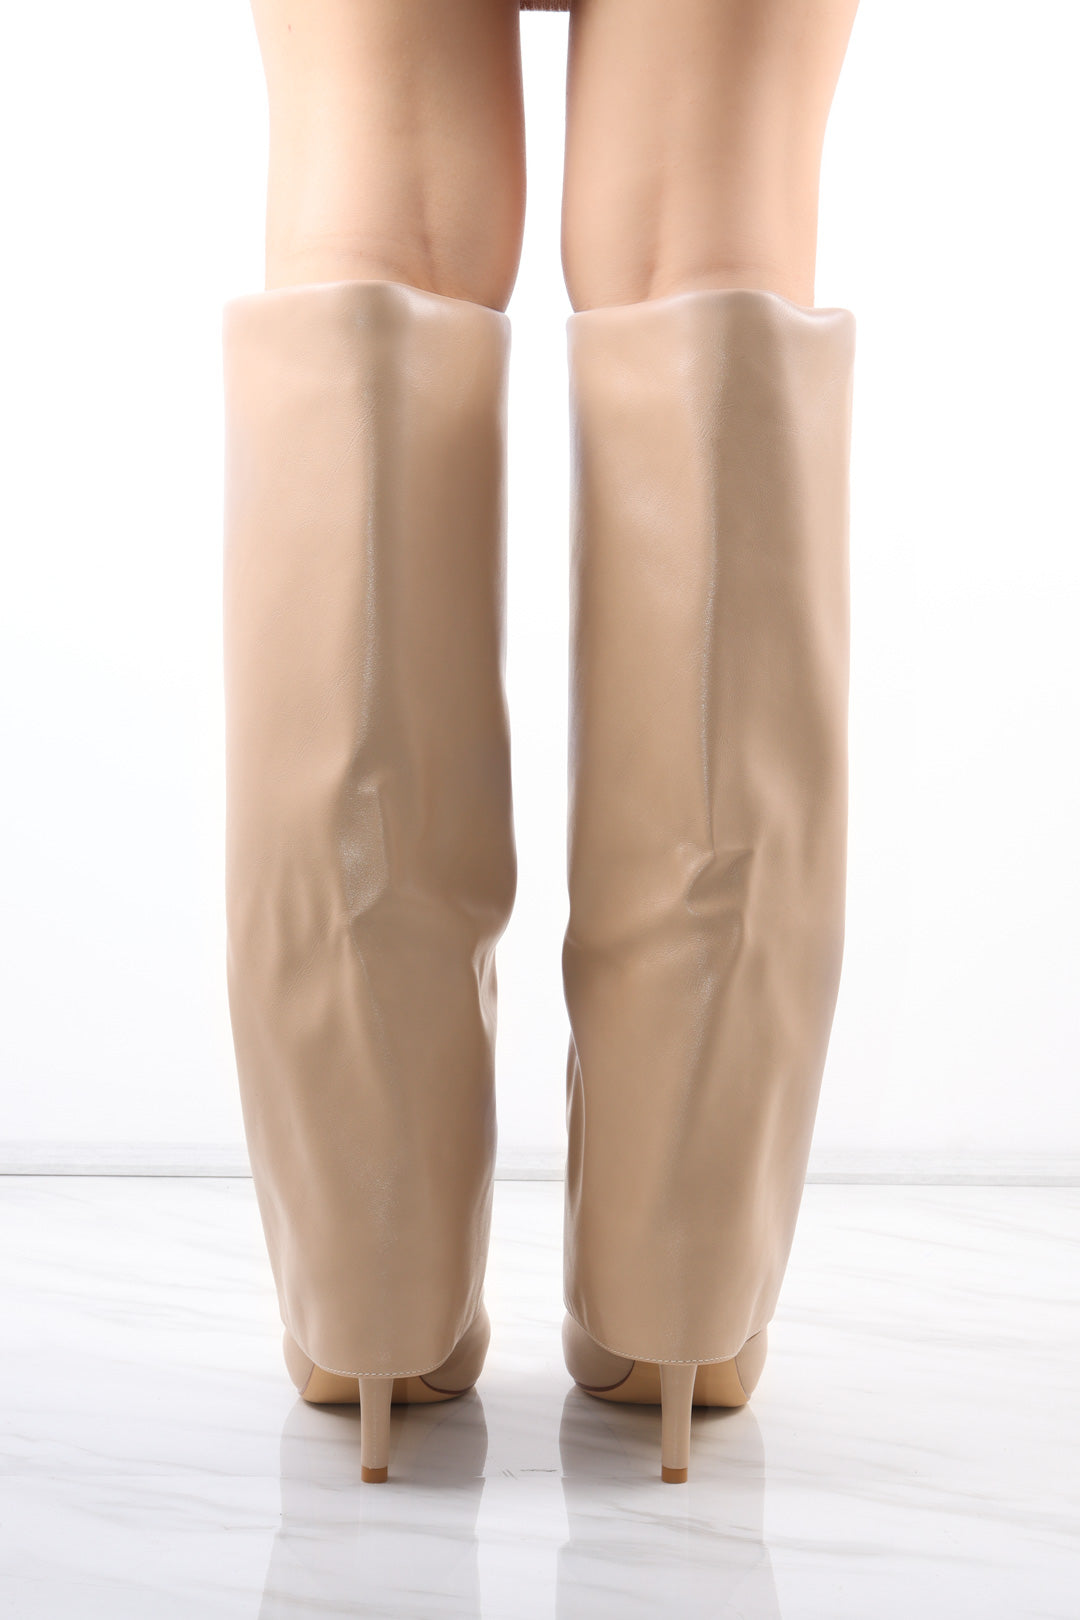 Load image into Gallery viewer, Beige Stiletto Leather Fold Over Shark Buckle Knee High Boot
